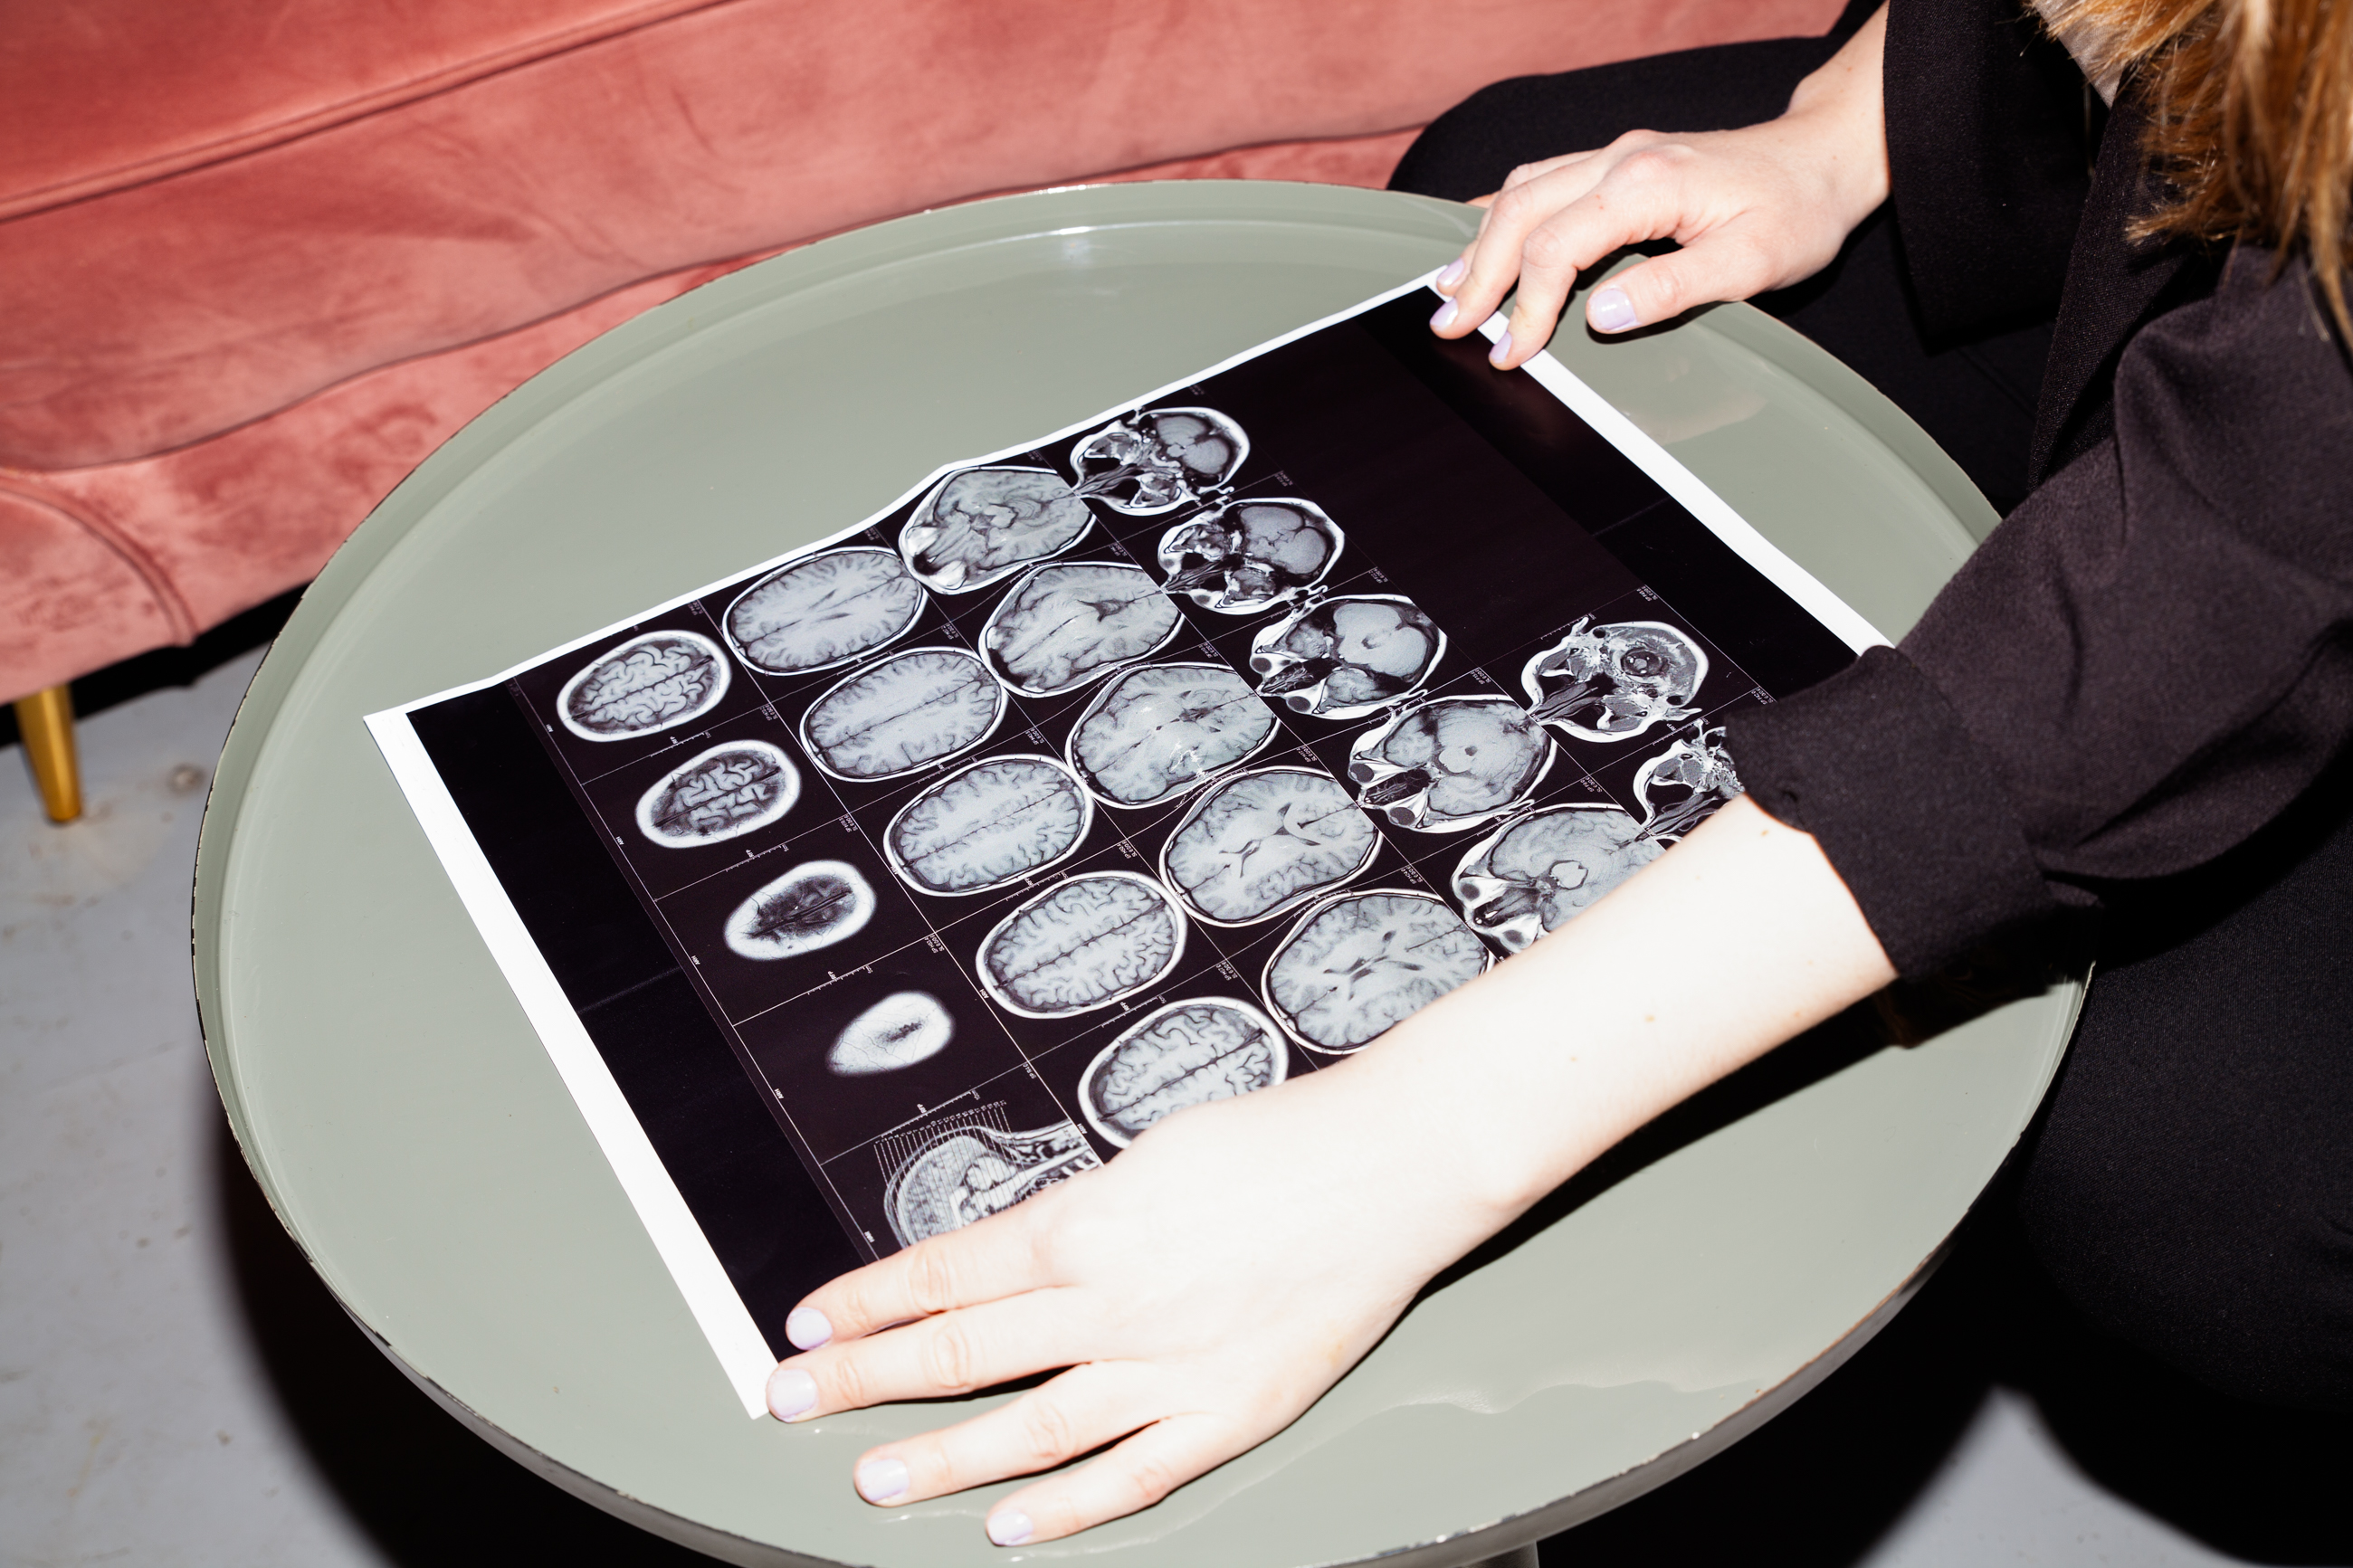 Mo, msninjaaa, Multiple sclerosis – hands holding a picture of an X ray on top of a green coffee table